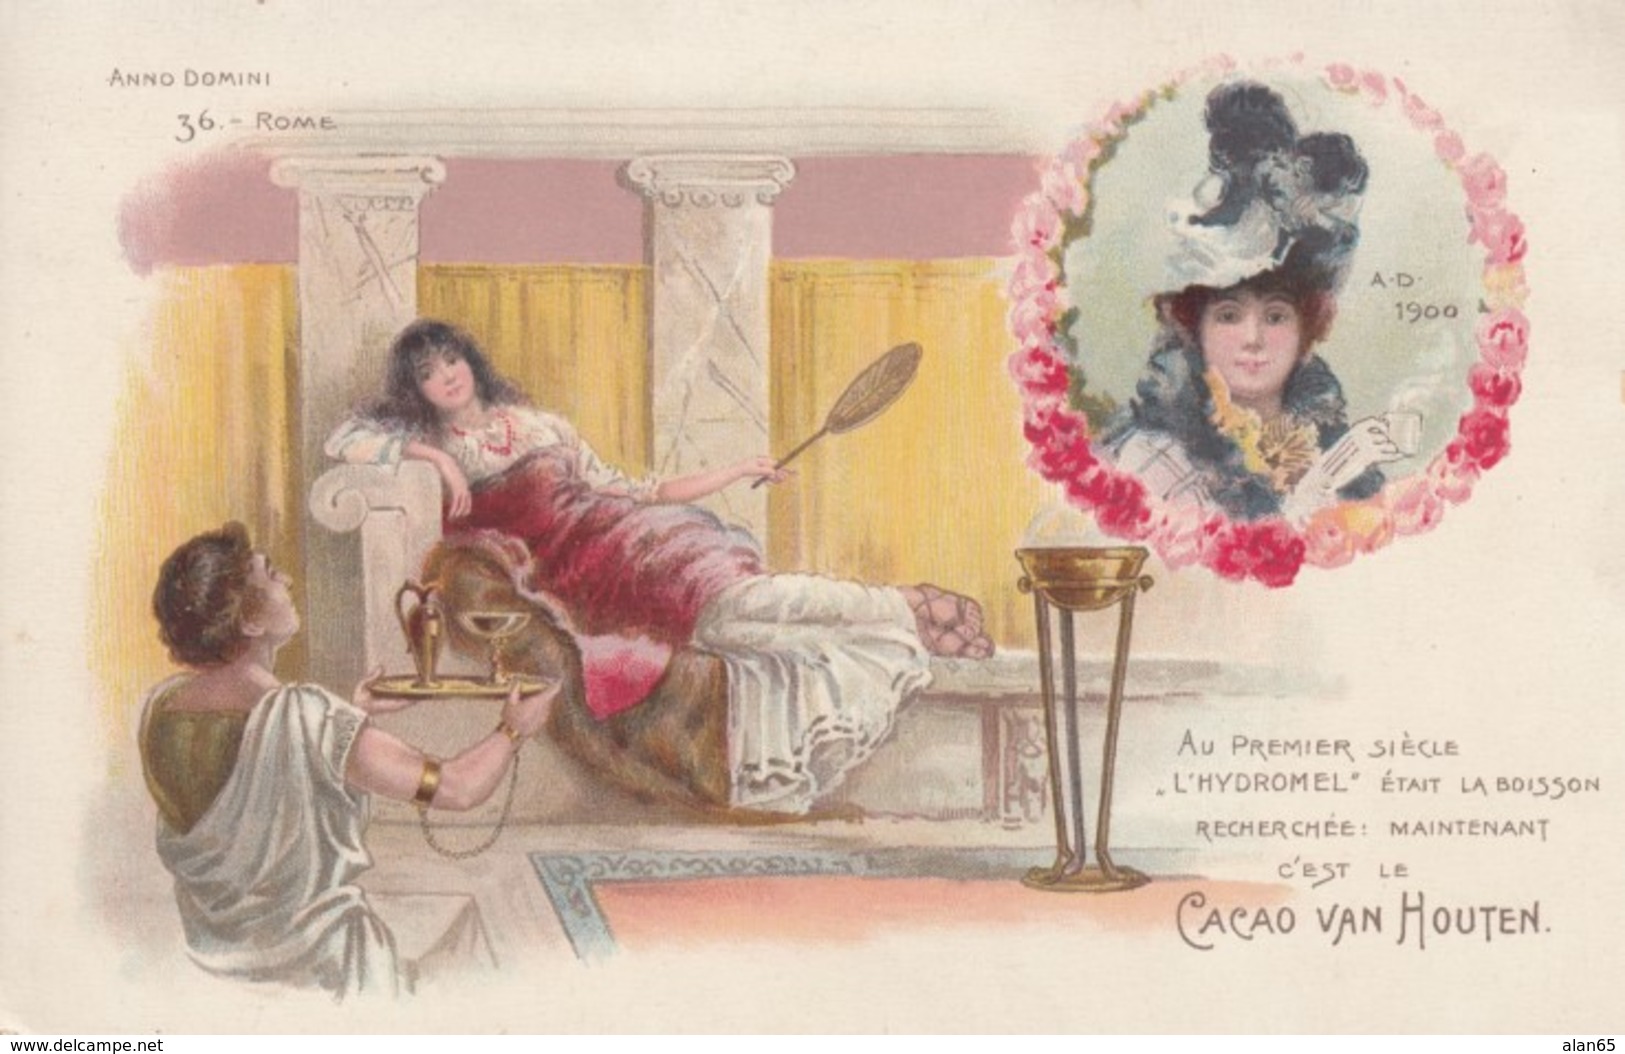 Cacao Van Houten Advertisement Card, Ancient Rome Theme And Modern 1900 Woman Drinks Van Houten Cocoa - Chocolate